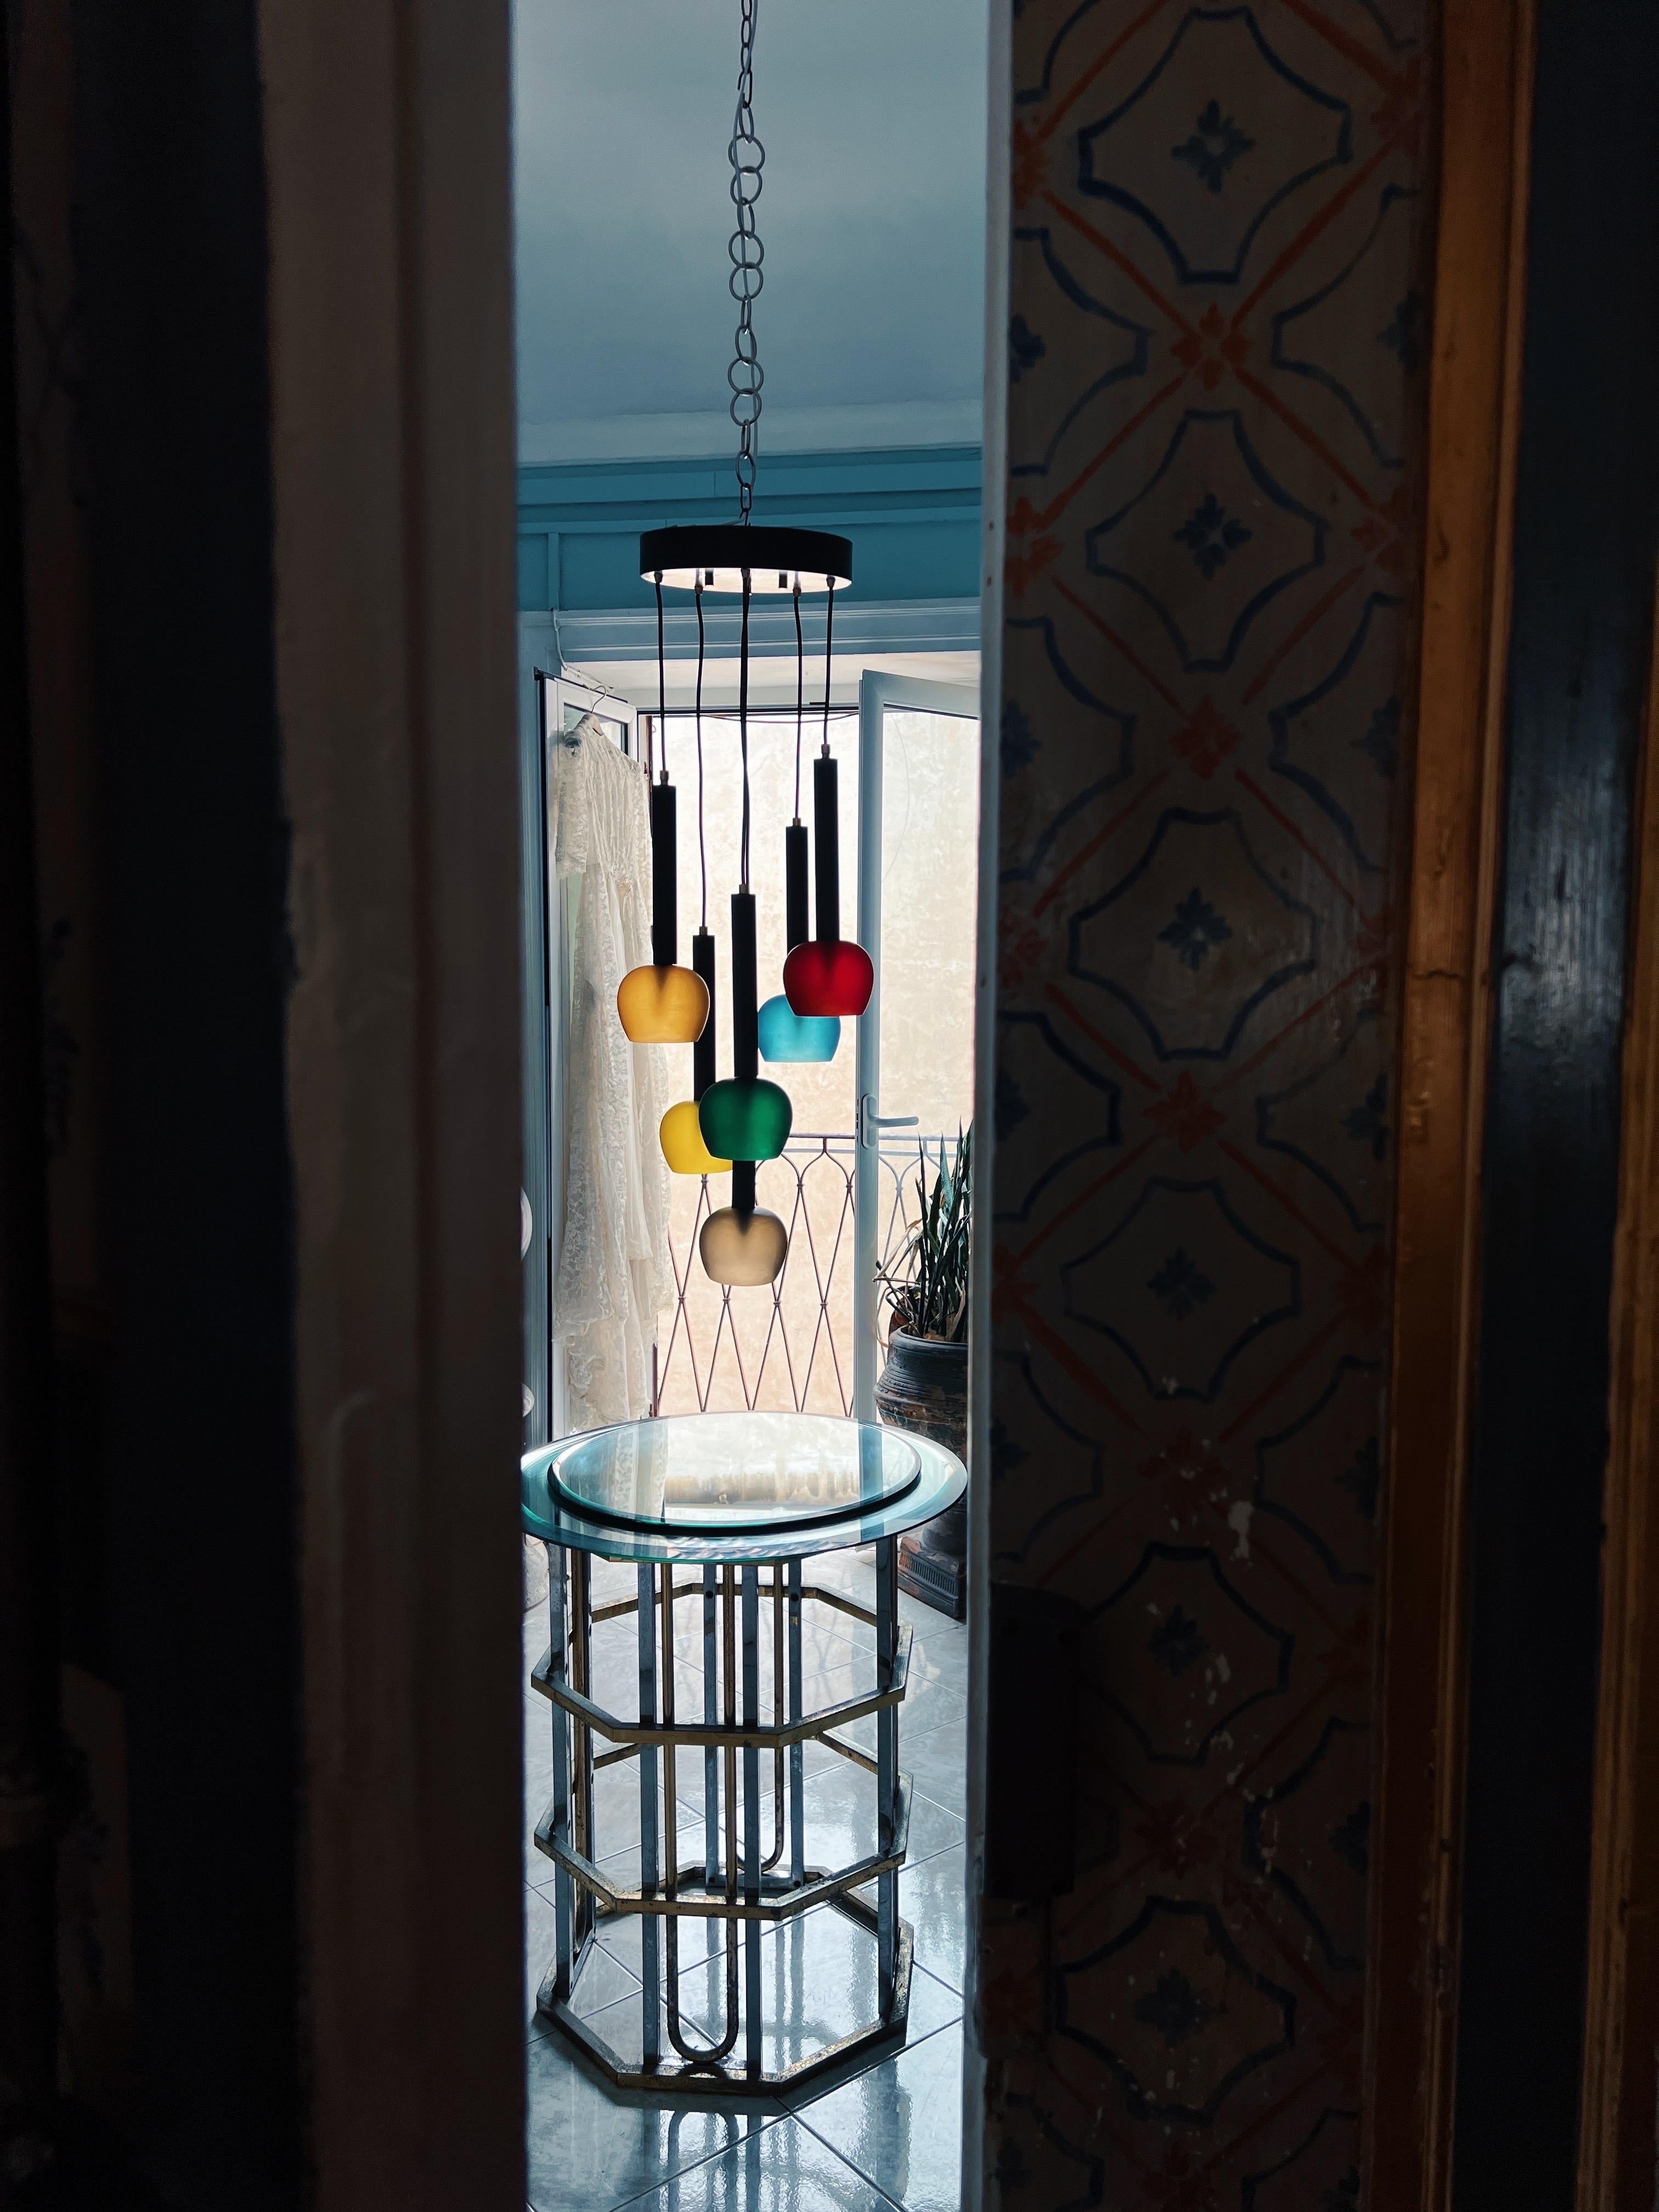 Mid-century Italian suspension light by Vistosi, a prominent Italian lighting design company that was active in the mid-20th century, particularly during the 1950s and 1960s. Vistosi is known for its innovative and modern lighting designs during